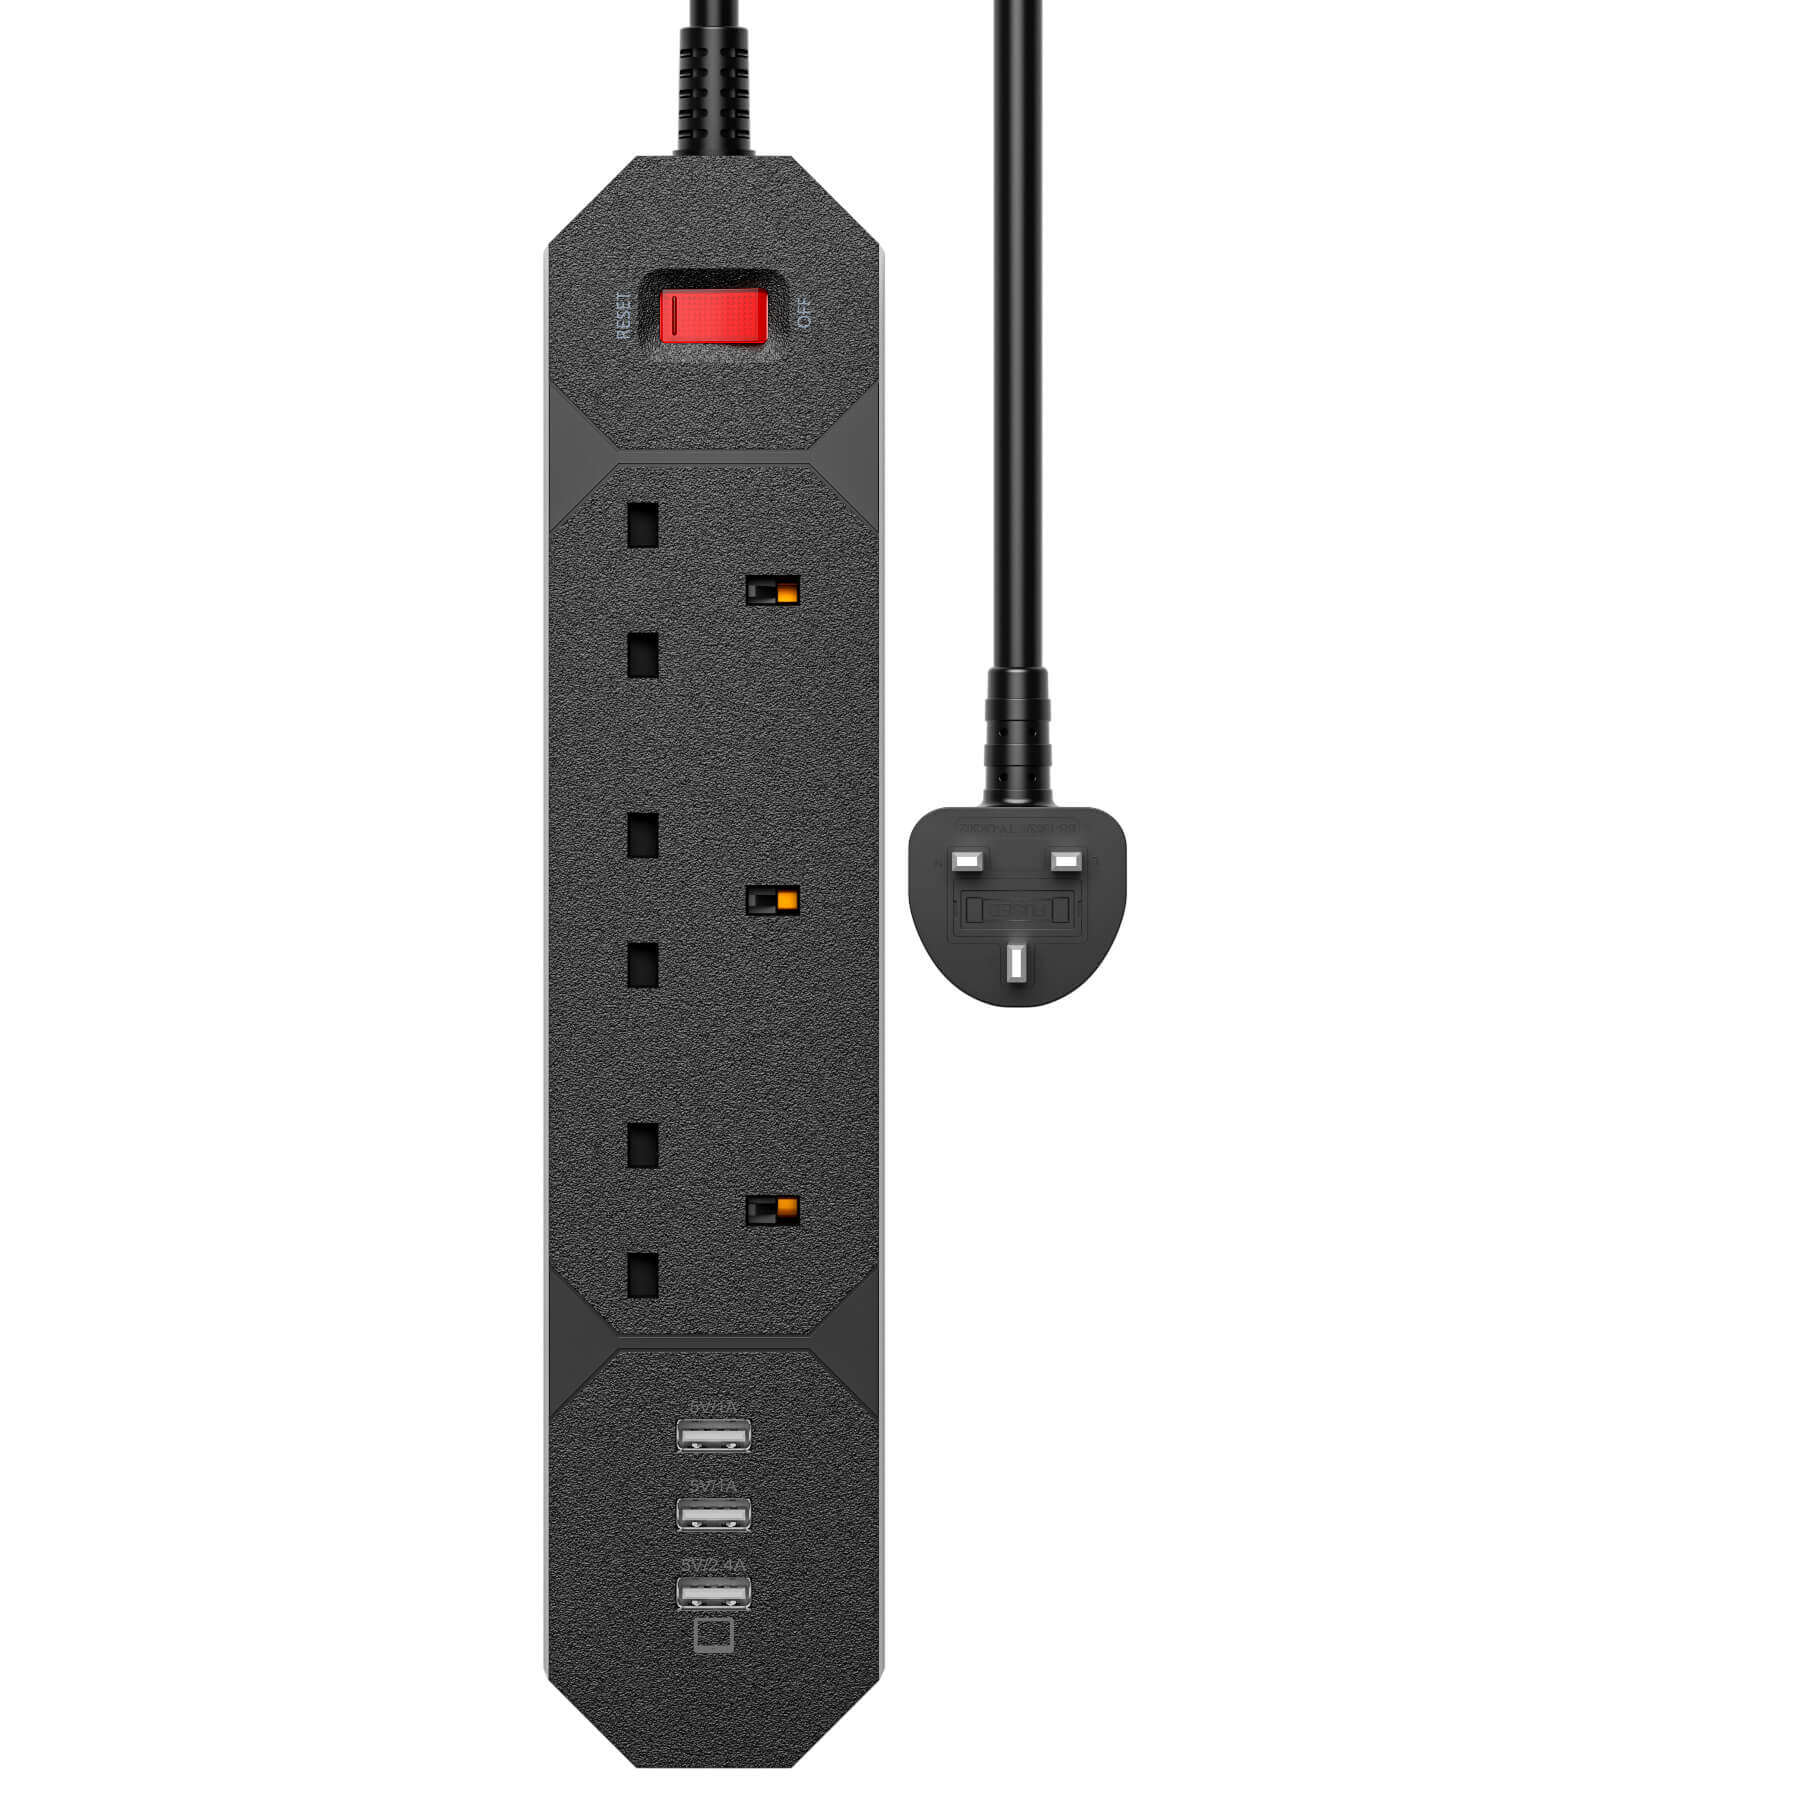 Design rack mount power strip with switches,odm small power strip with switch, surge protector power strip with individual switches Sales